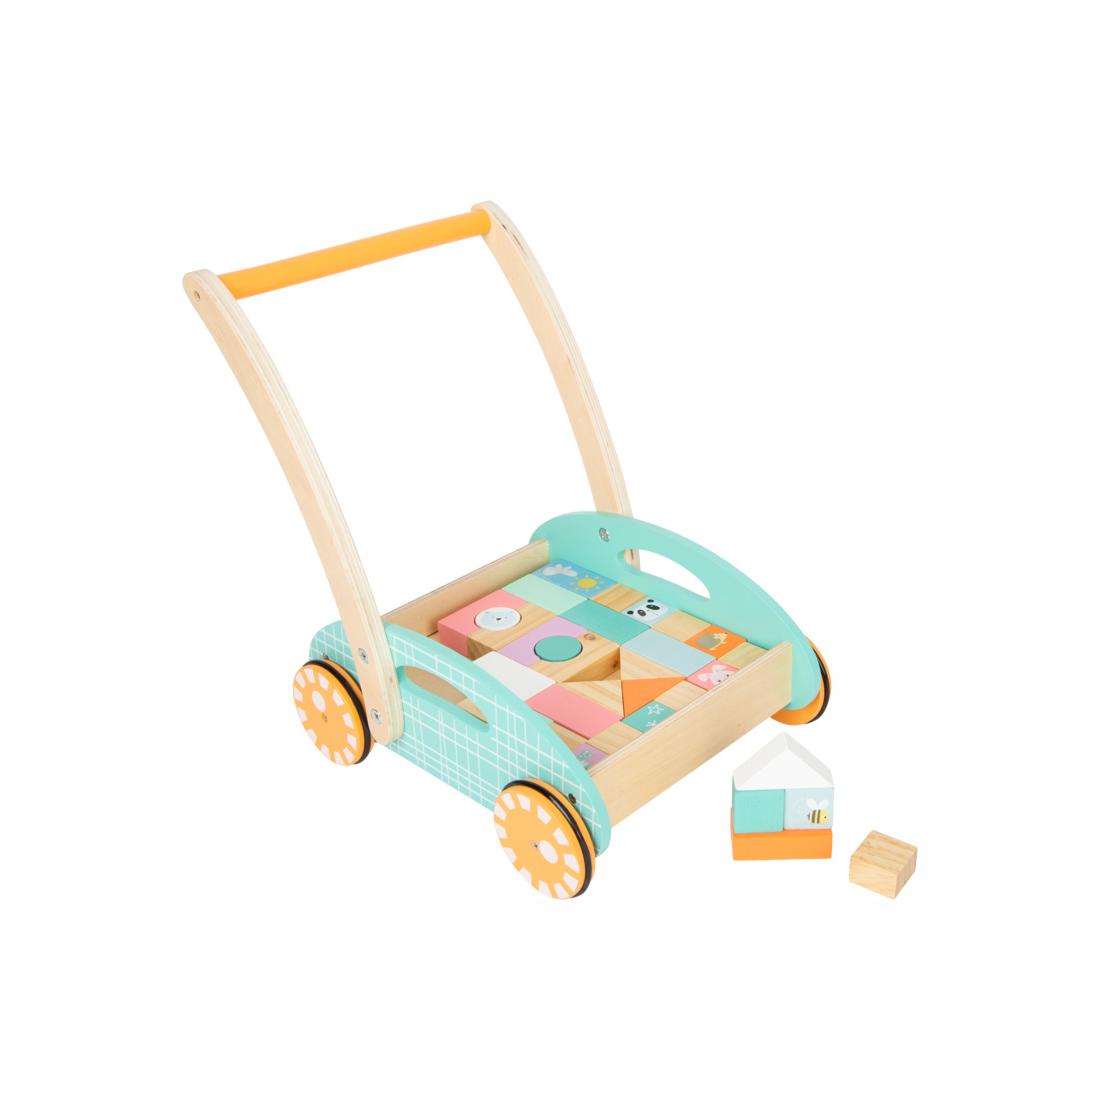 34 pcs cossy Wooden Baby Learning Walker Toddler Toys for 1 Year Old and up Updated Version Fox Blocks and Roll Cart Push Toy 